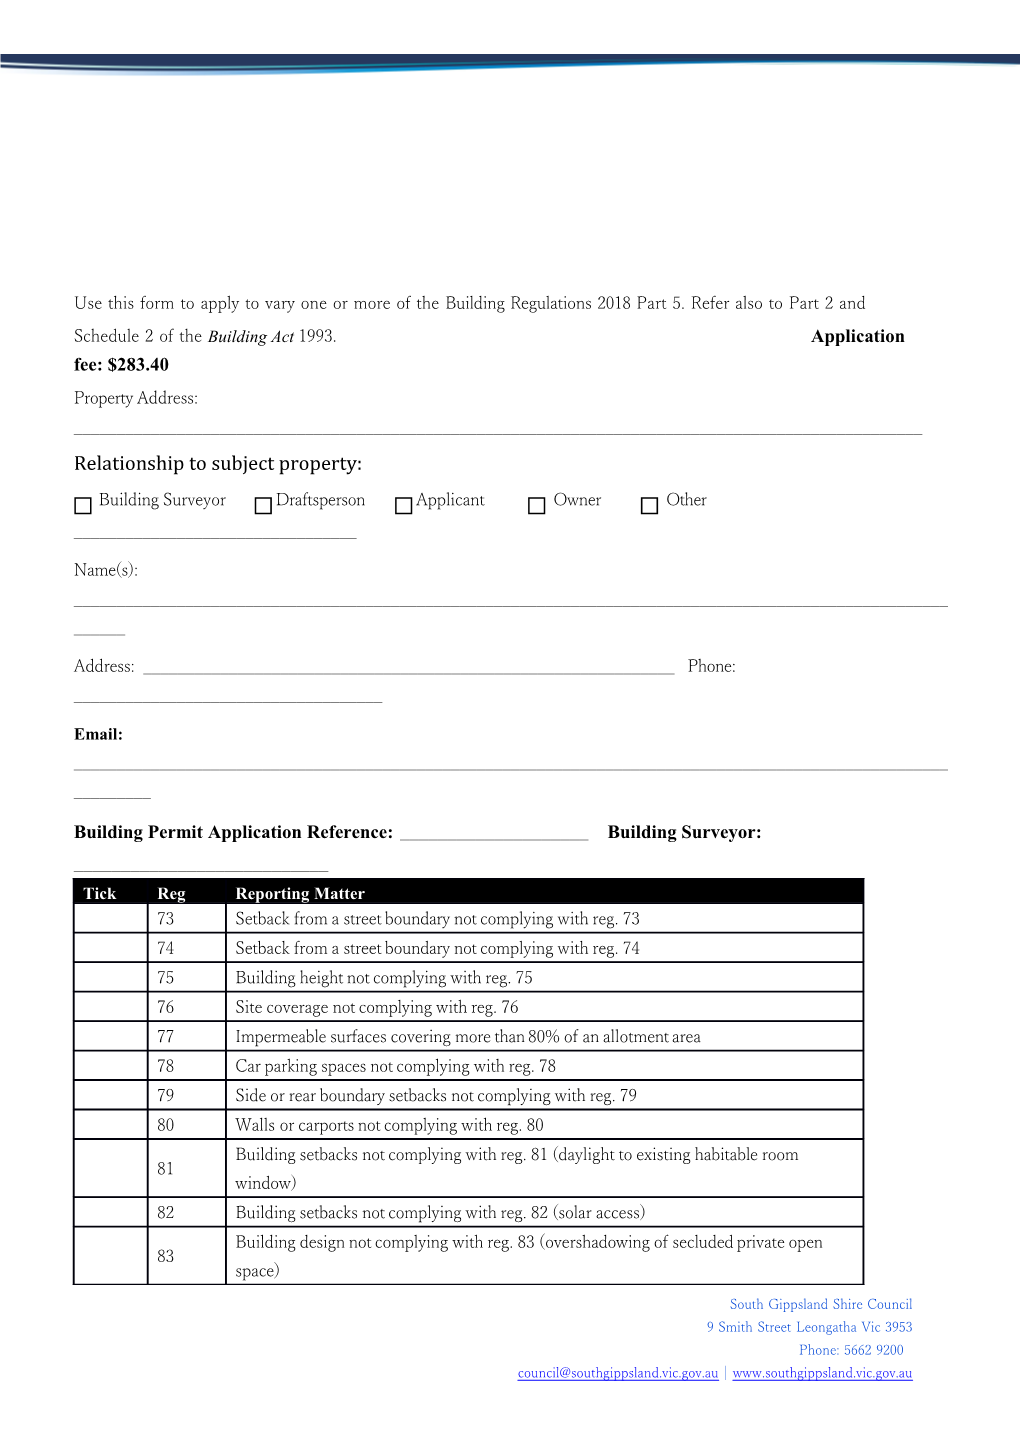 Use This Form to Apply to Vary One Or More of Thebuilding Regulations 2018Part 5. Refer